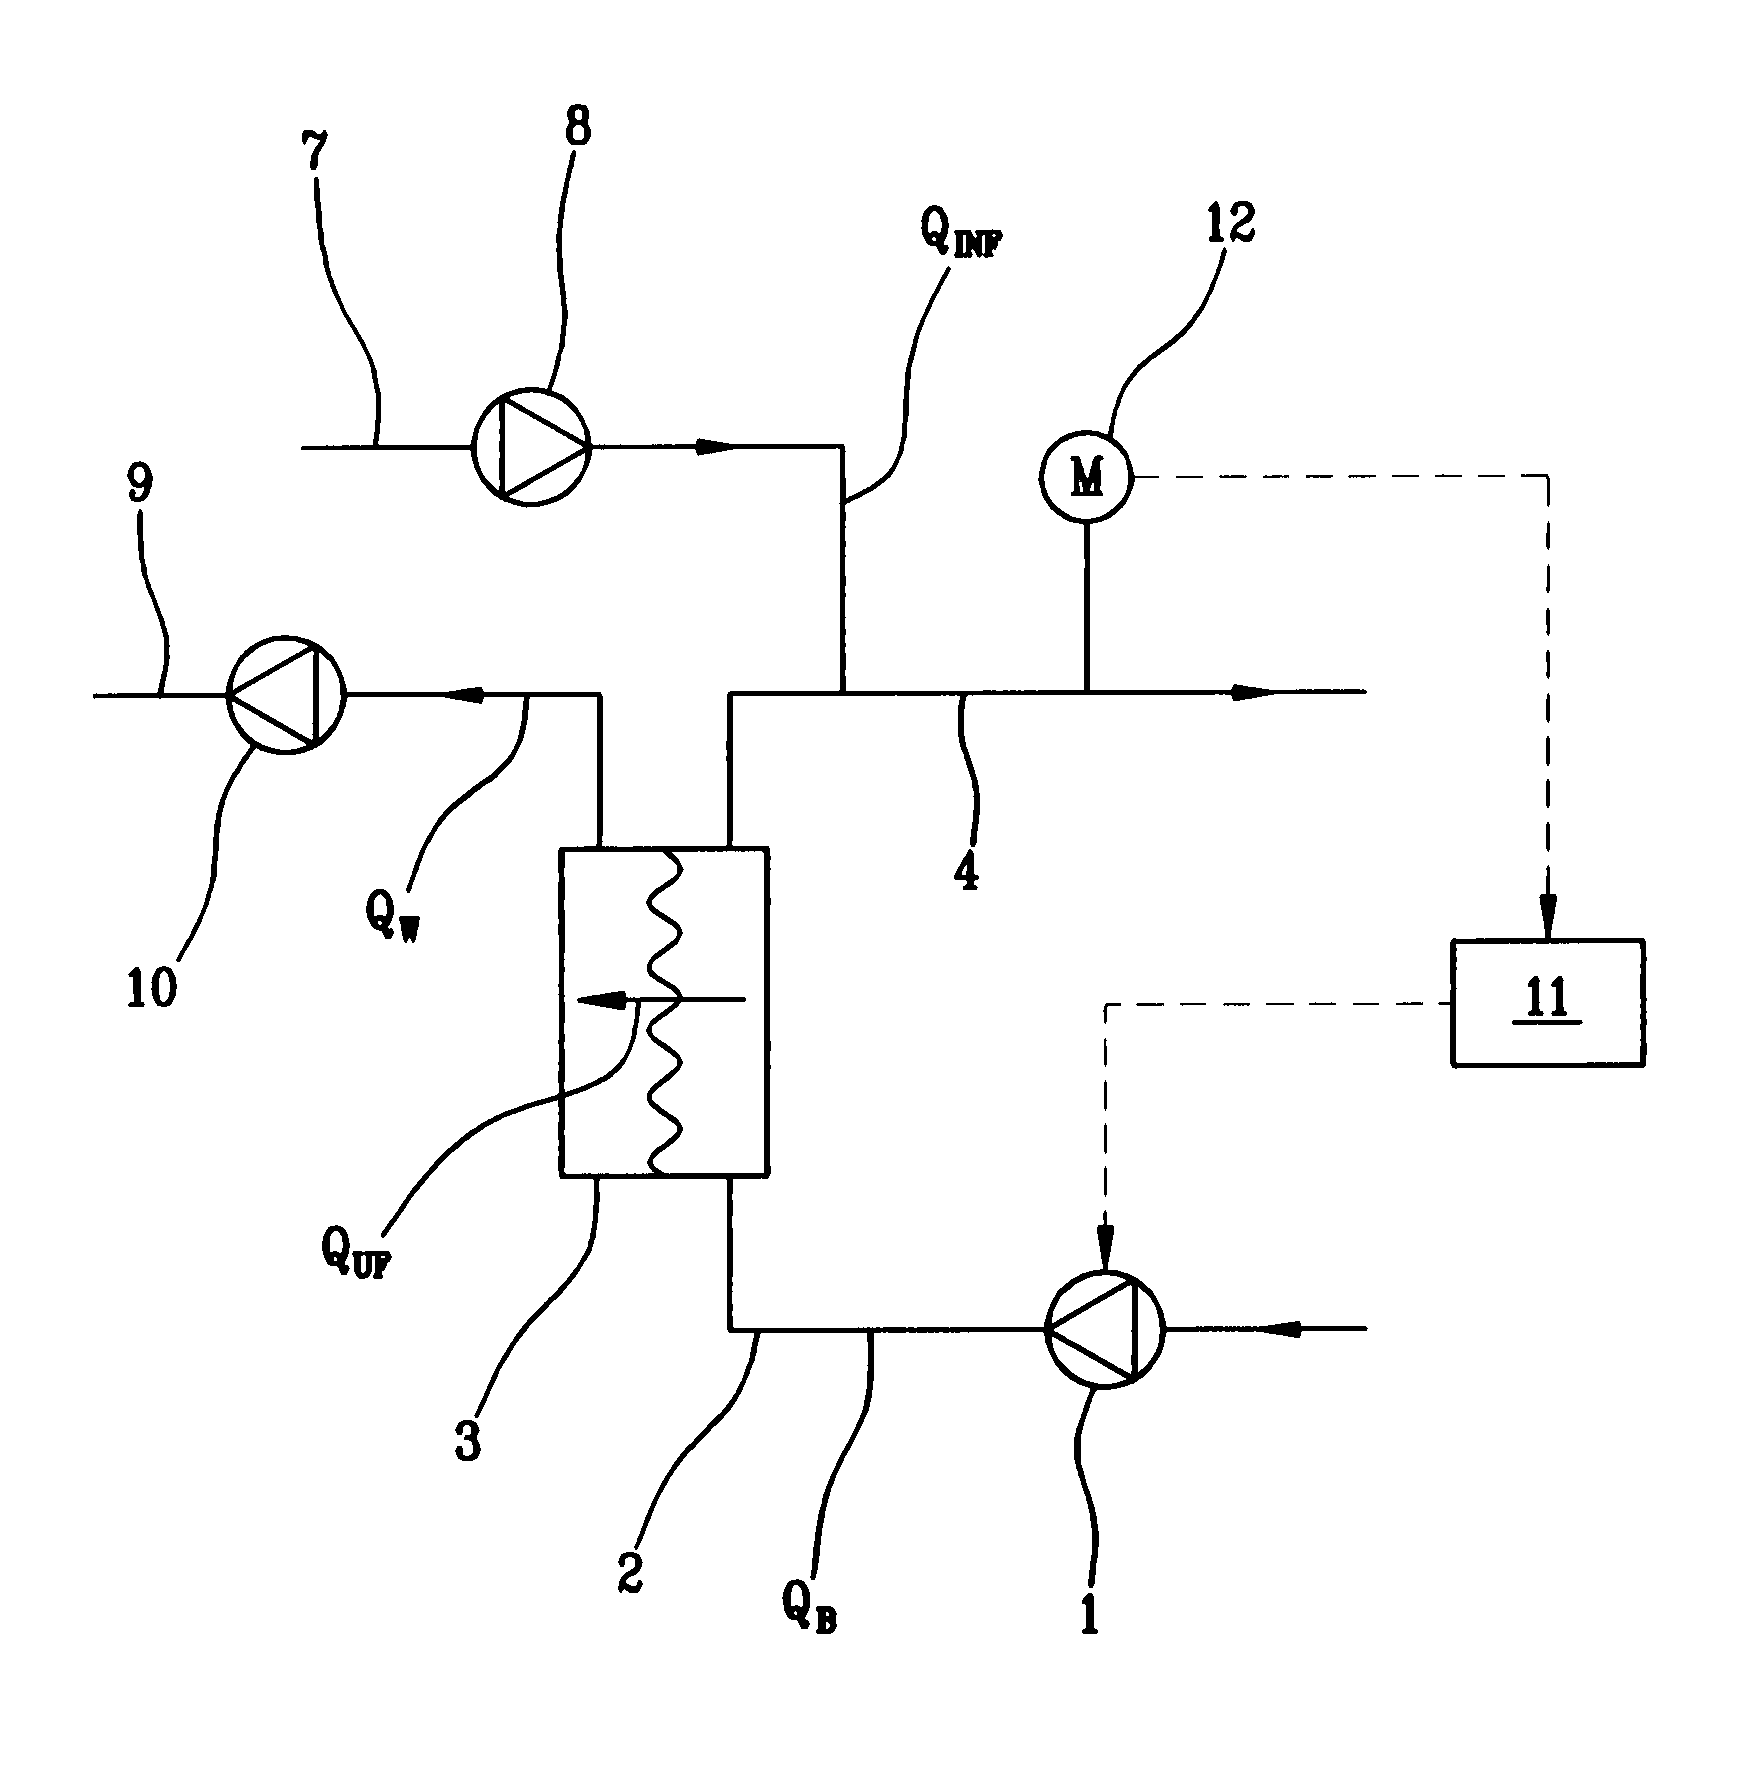 Hemodialysis or hemo(DIA)filtration apparatus and a method for controlling a hemodialysis or hemo(DIA)filtration apparatus